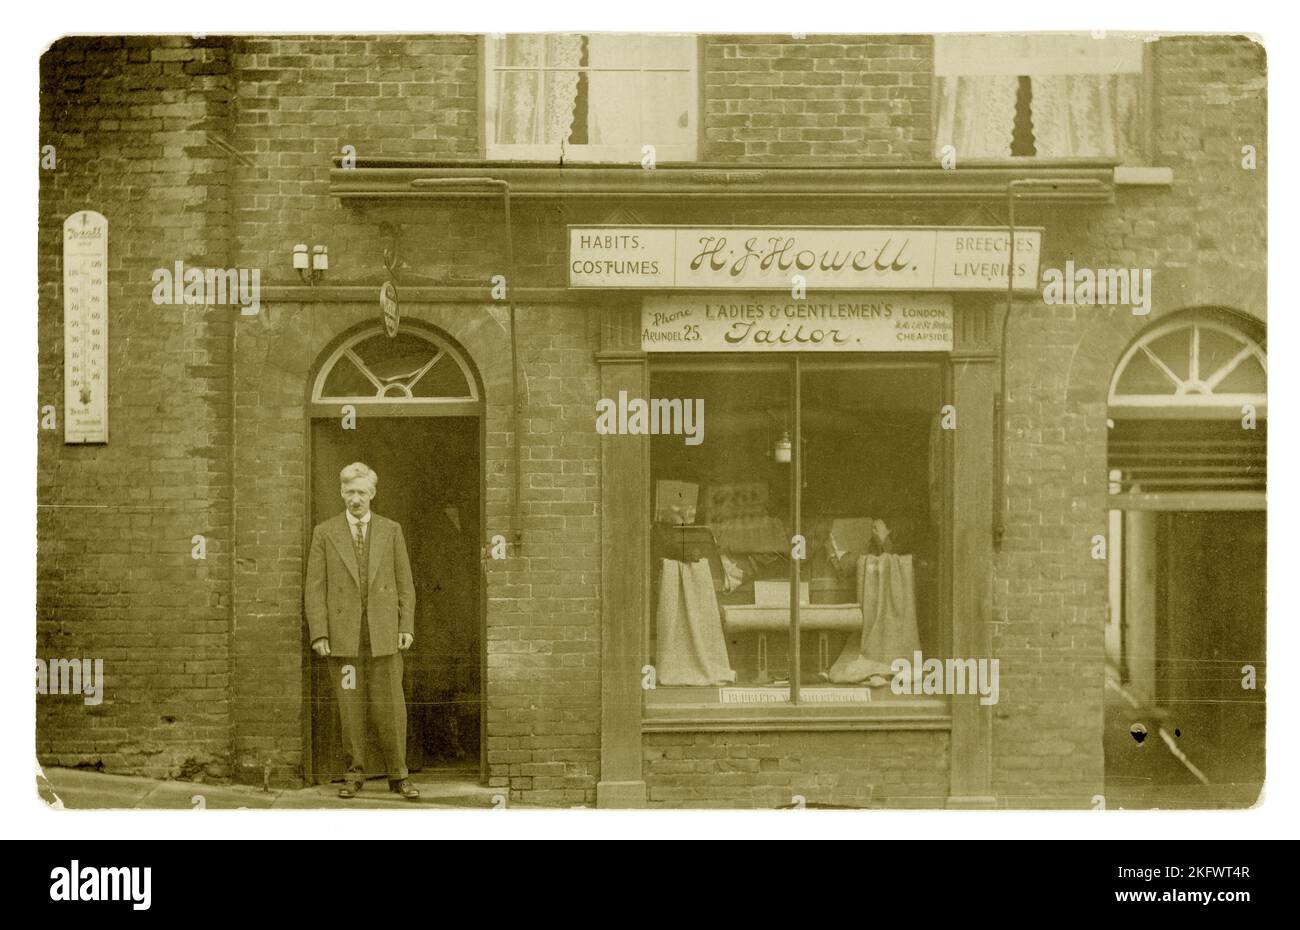 Original WW1 era postcard of smartly dressed proprietor / tailor, standing in doorway outside a boutique shop - there's a sign for Burberry waterproofs in the window and lengths of tweed. Sign above states H J Howell Ladies and Gents tailors & also advertising tailoring of 'Costumes, Habits., Breeches & Liveries'  The sign also advertises other premises at 11 Milk St Cheapside London. But there is a telephone exchange on the sign for Arundel 25 - so this shop is in the West Sussex seaside town of Arundel in the High Street - perhaps he retired here and kept the London shop. Circa 1917, U.K. Stock Photo